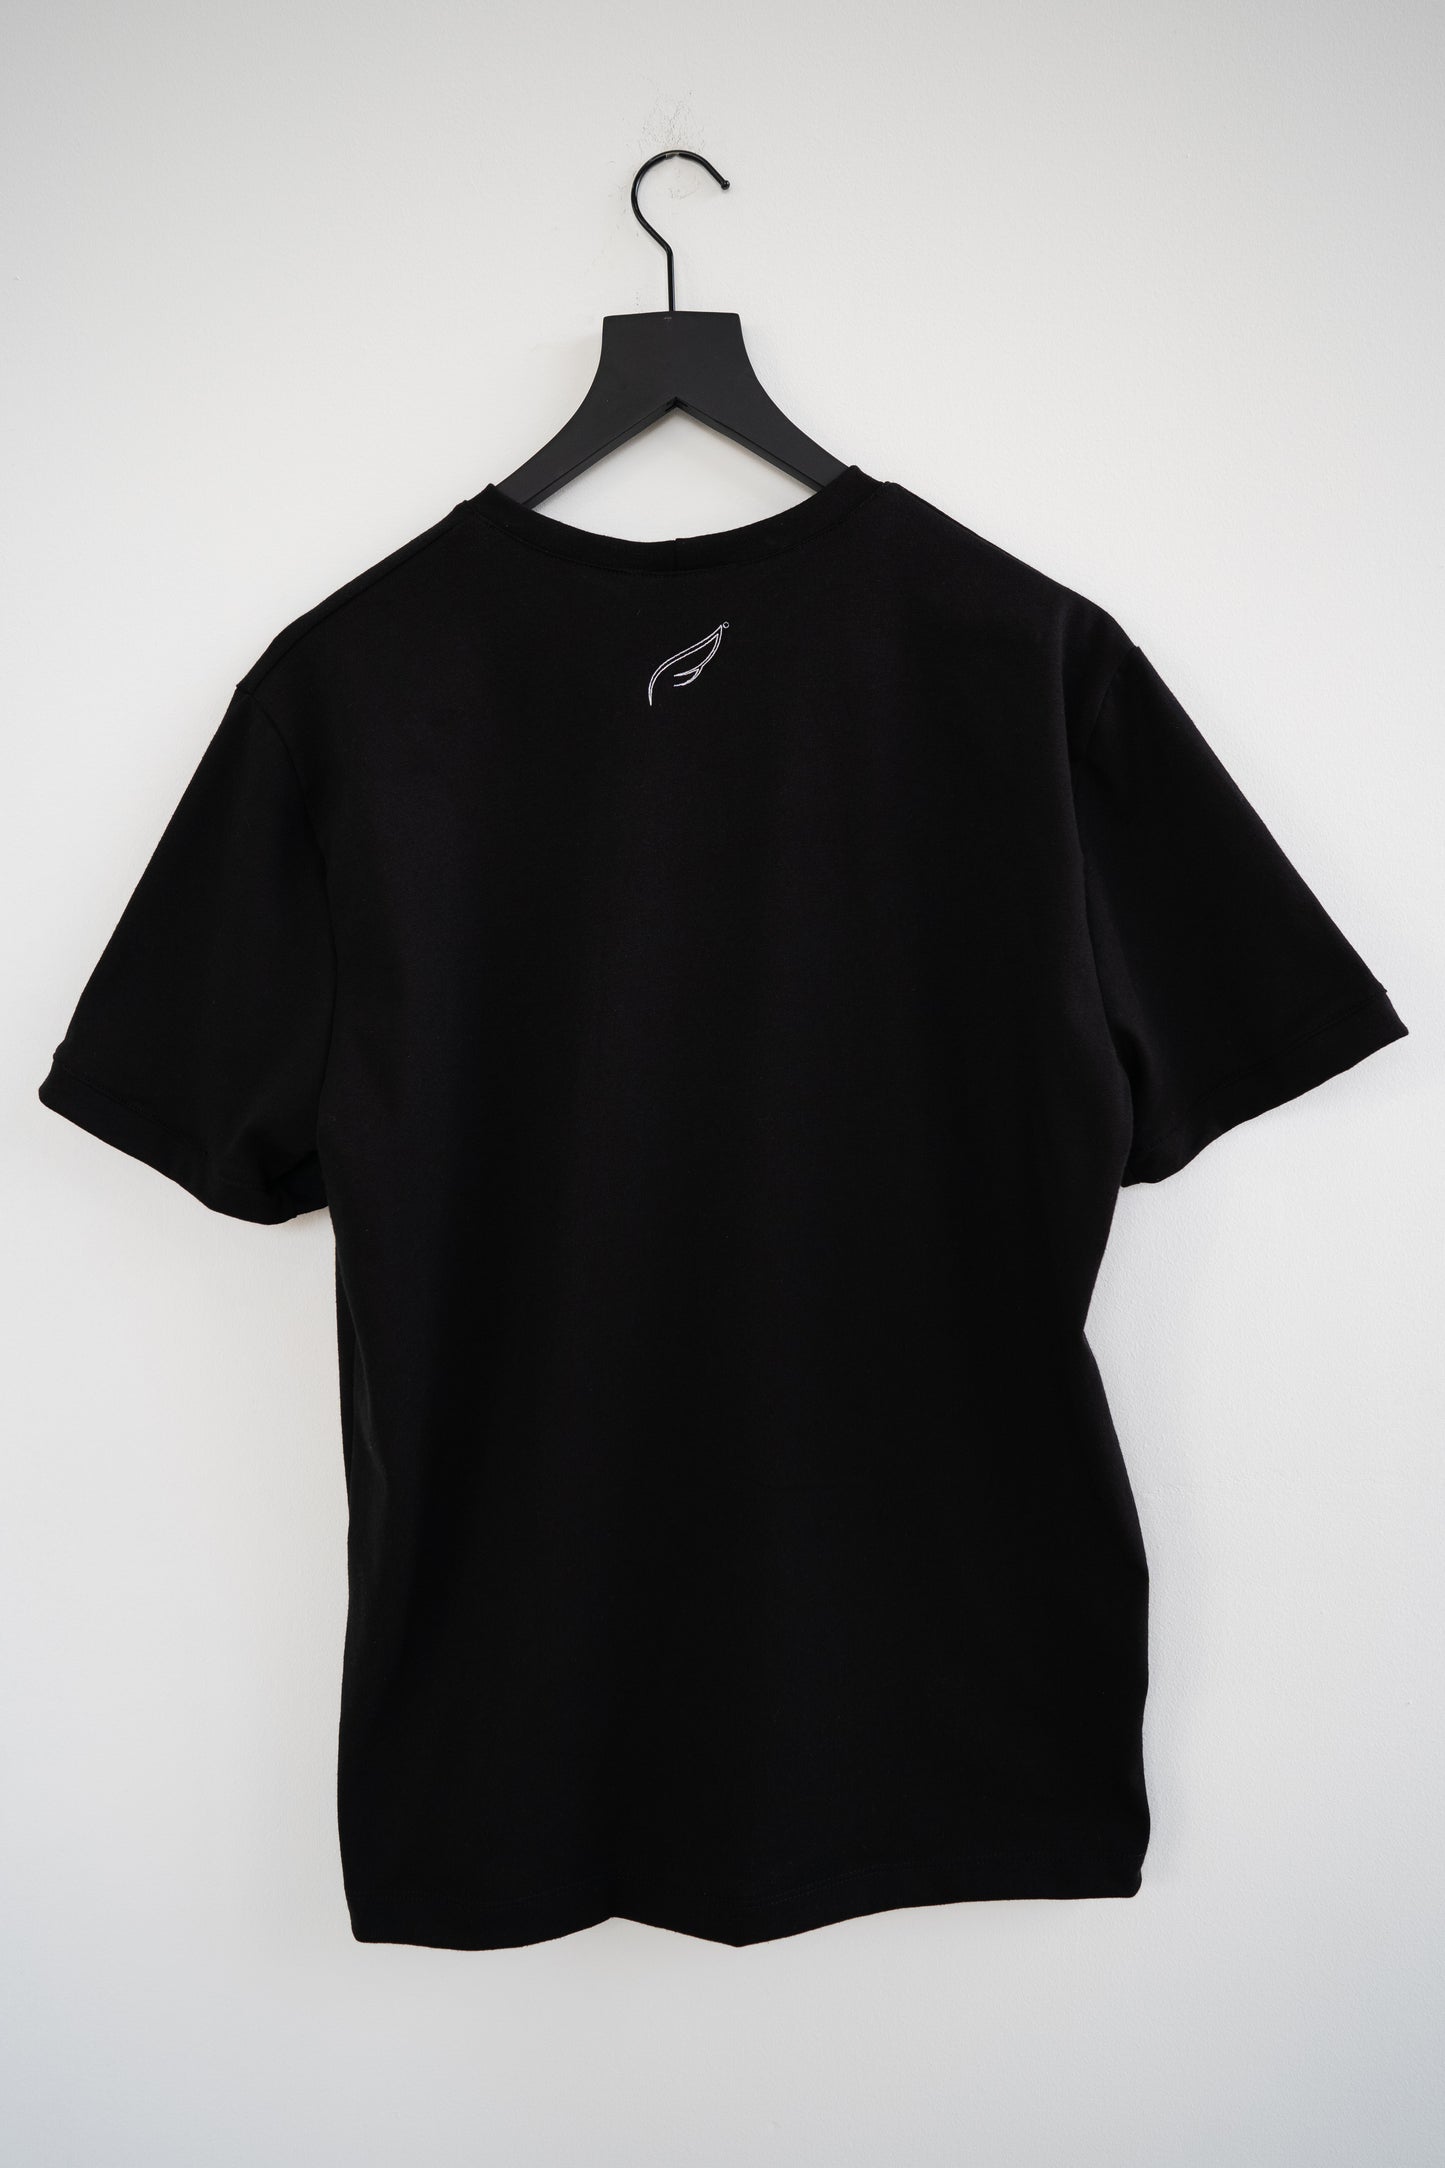 Fam - Cut and Sew Short-Sleeve Shirt - 9th Collection